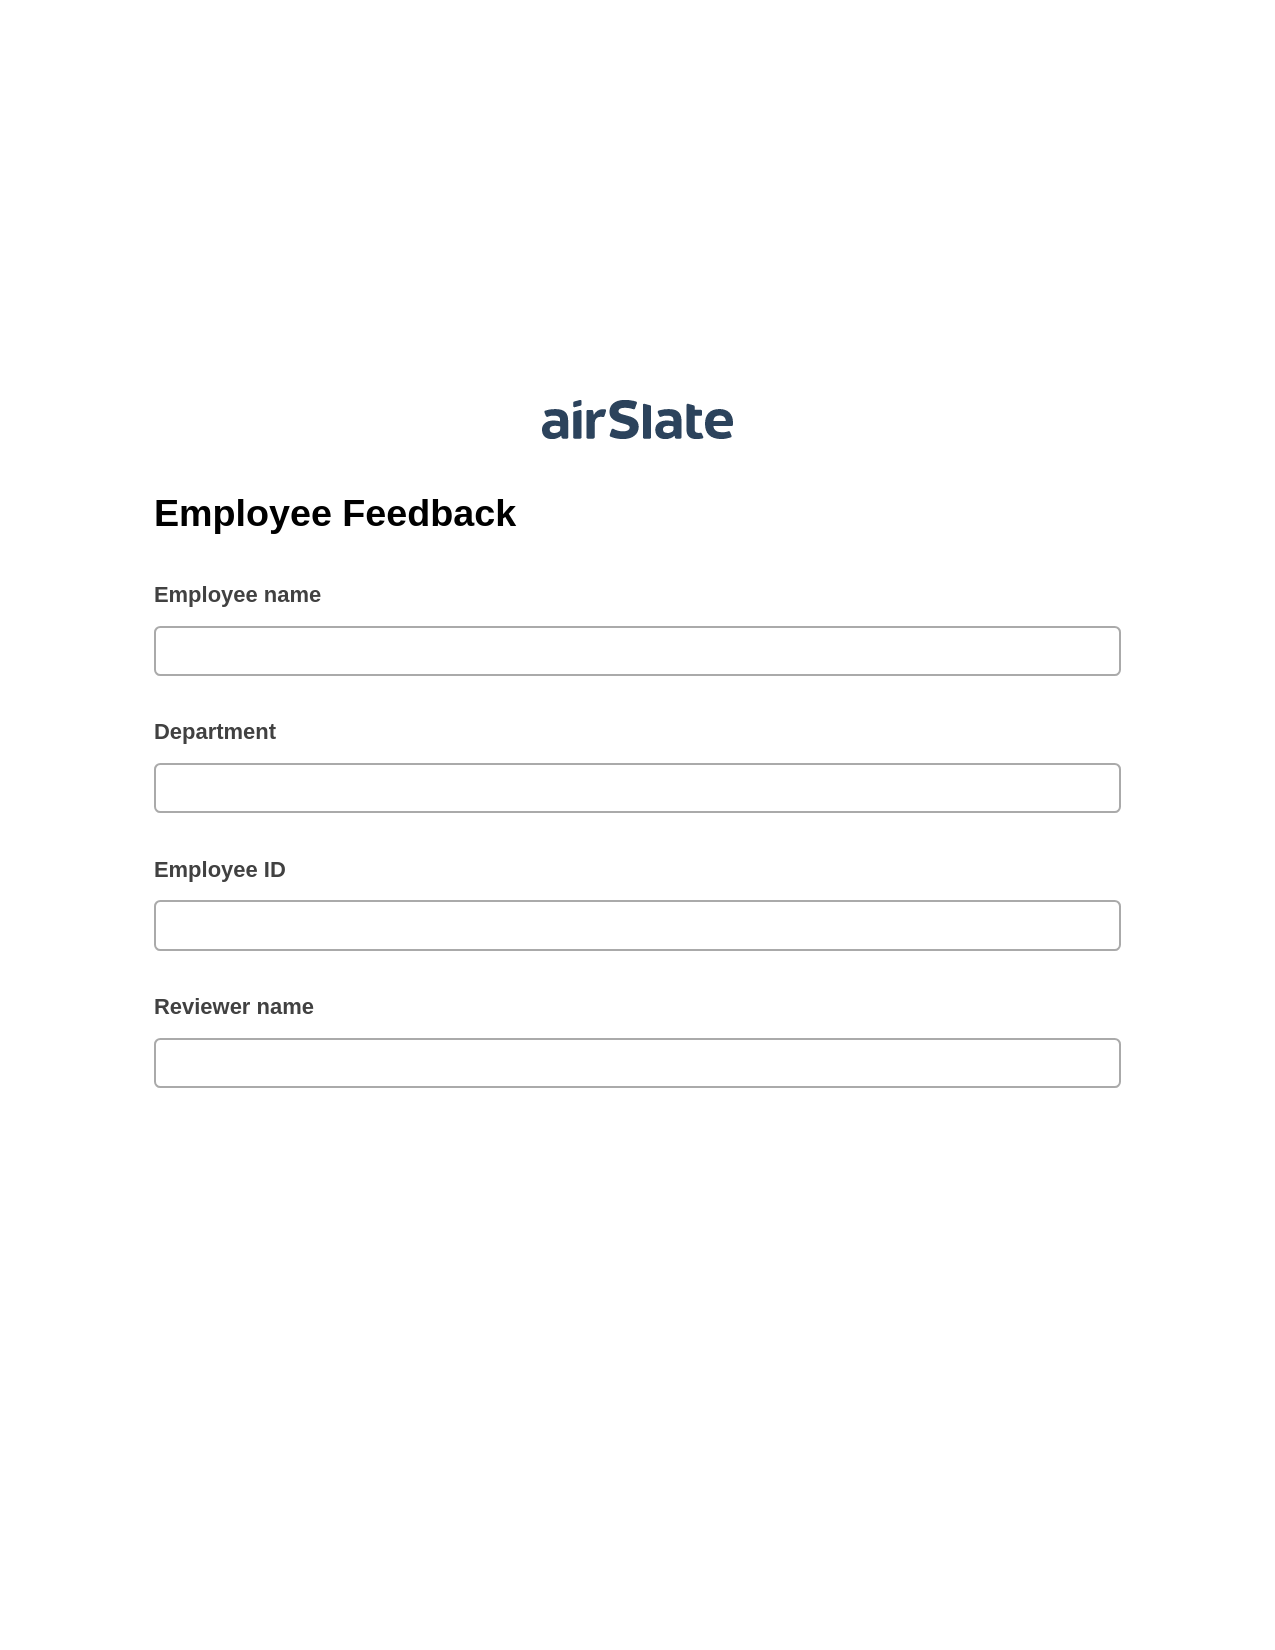 Multirole Employee Feedback Pre-fill Document Bot, Assign Roles to Recipients Bot, Post-finish Document Bot